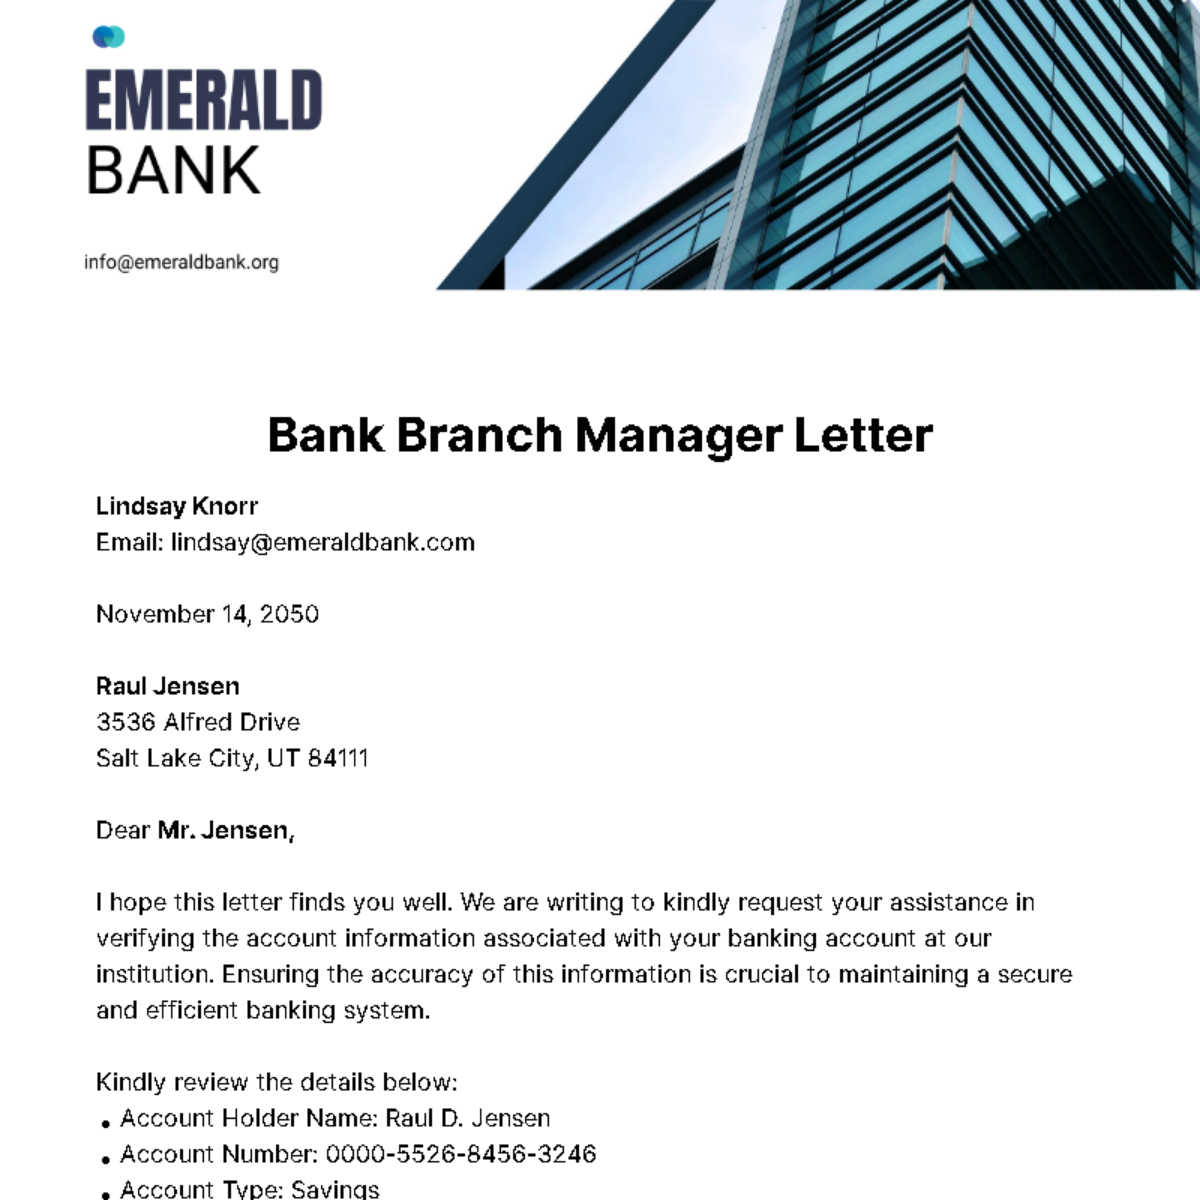 Bank Branch Manager Letter Template